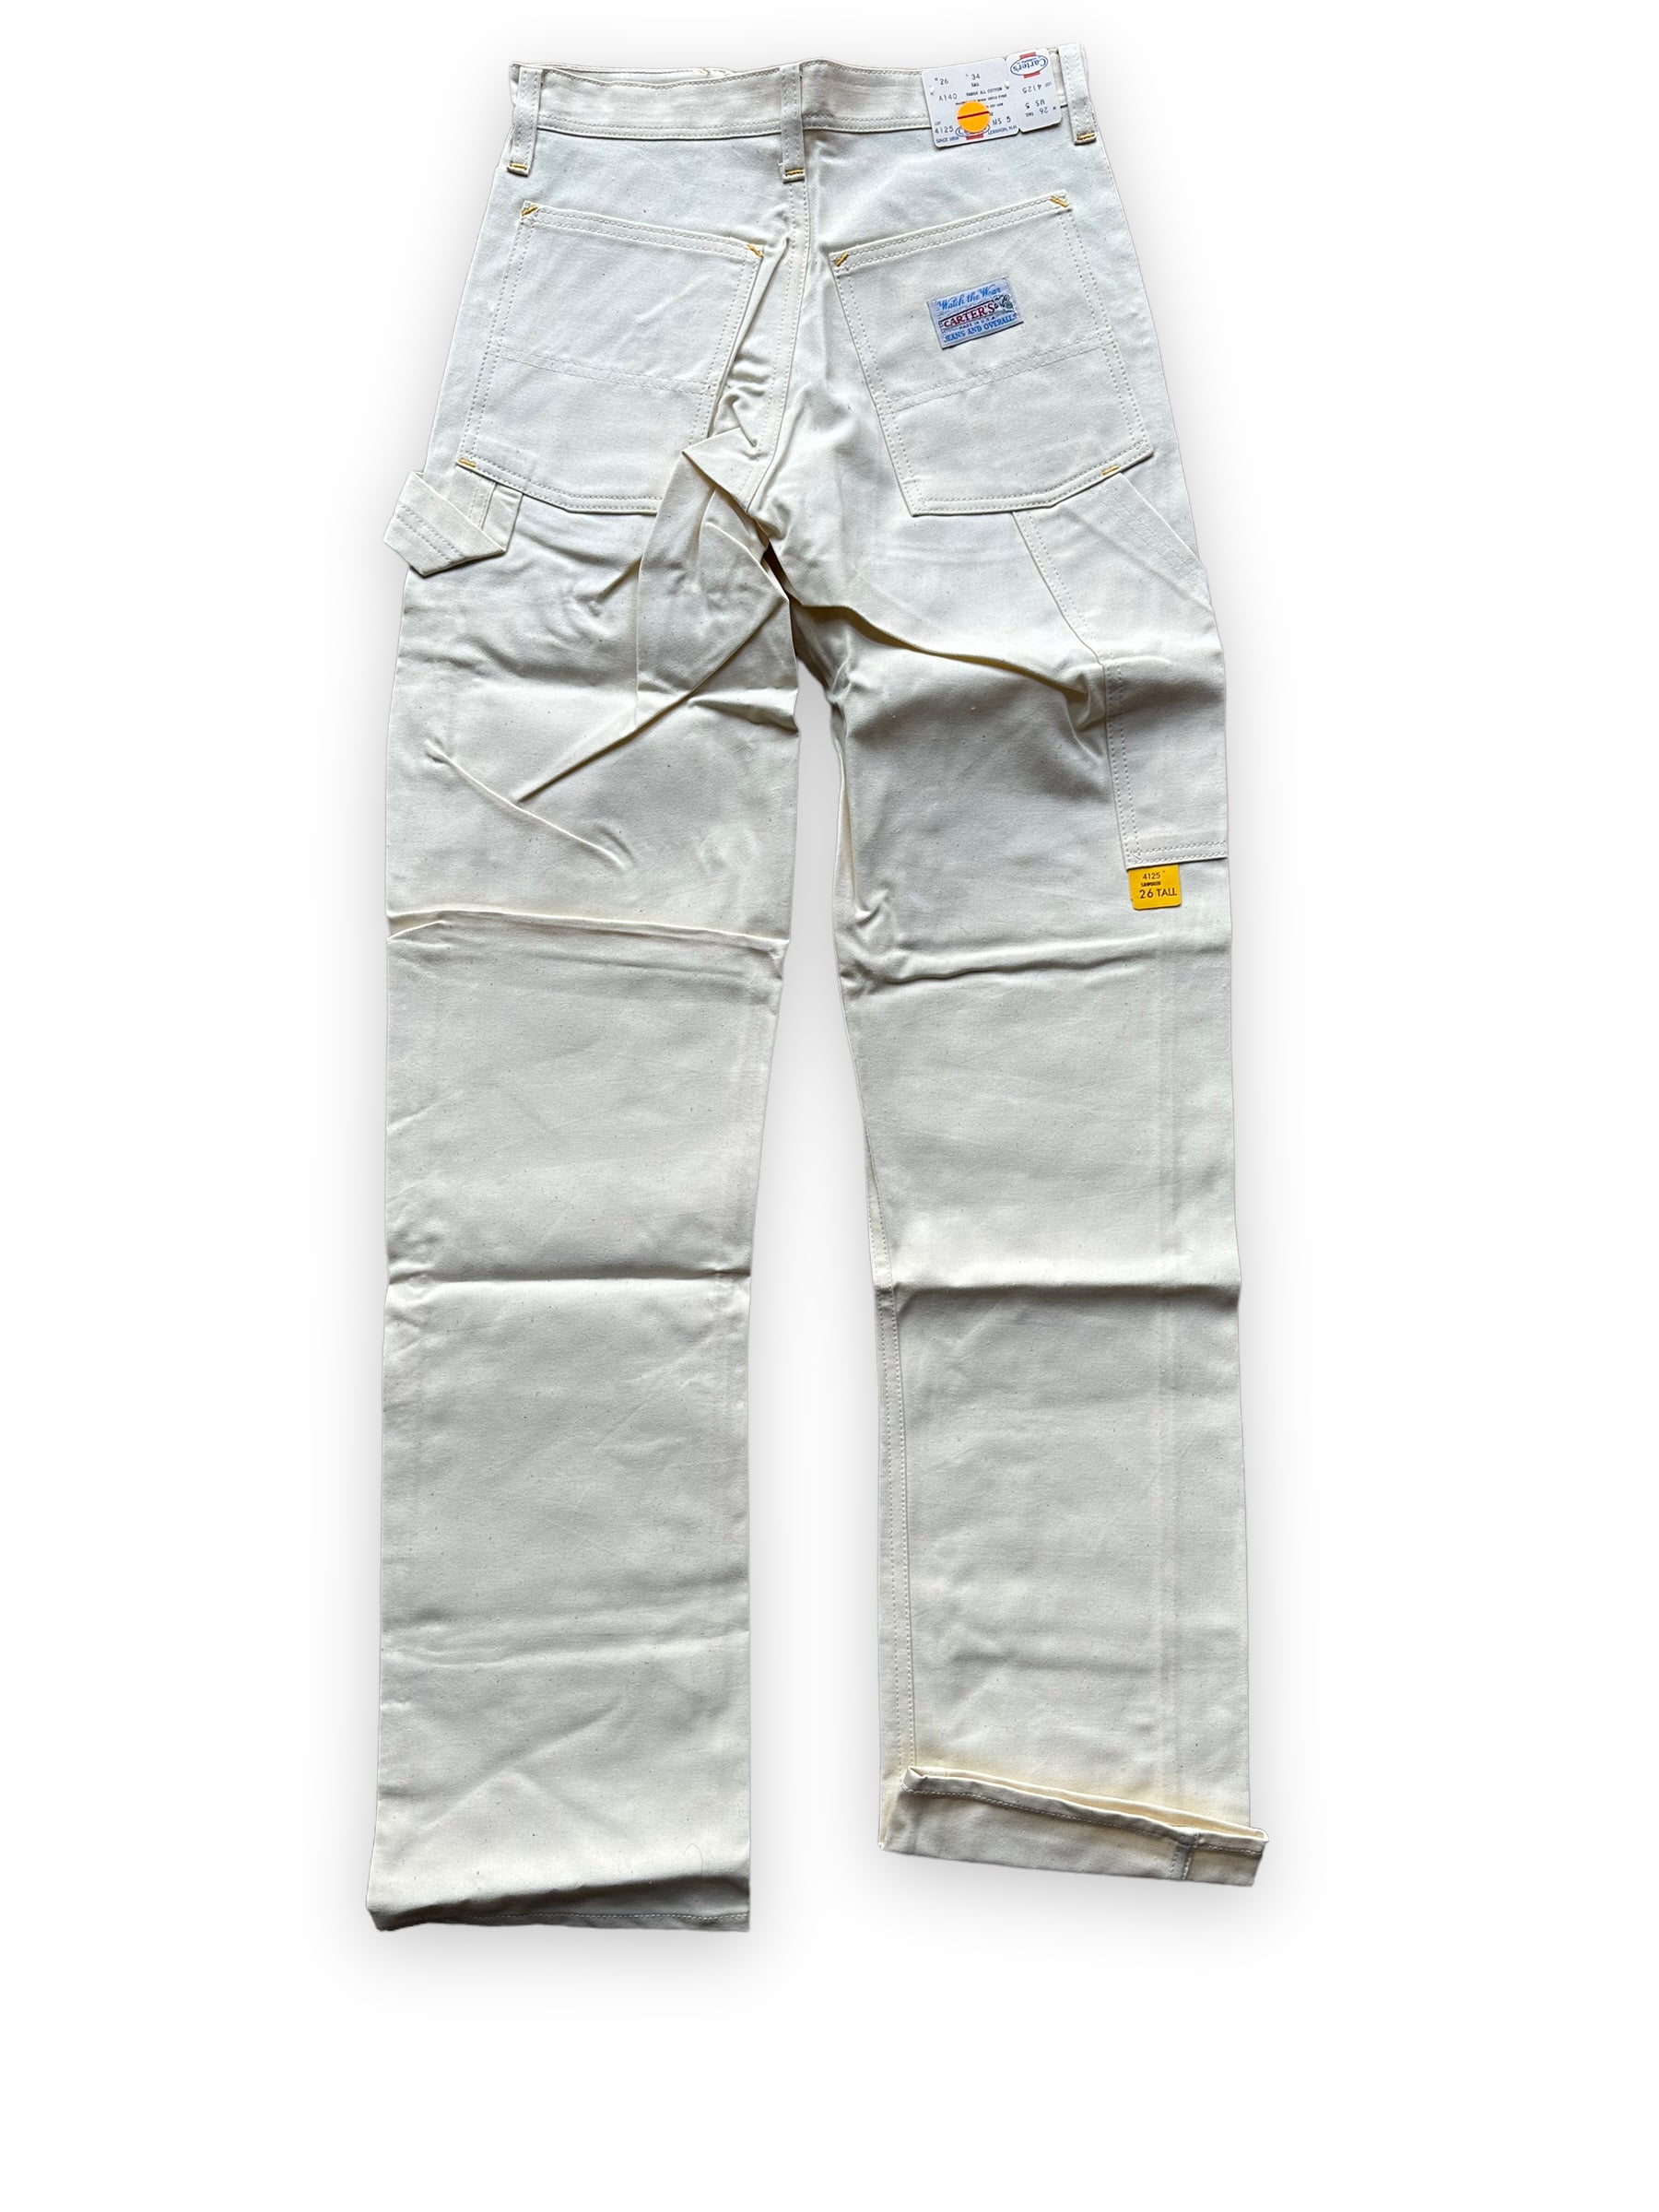 Amazon.com: Safety Girl Painters Pants - 18 Petite, Natural | Made with  Comfortable Material Pure Cotton Fabric | Painters Pants for Women with  Large Pockets : Tools & Home Improvement